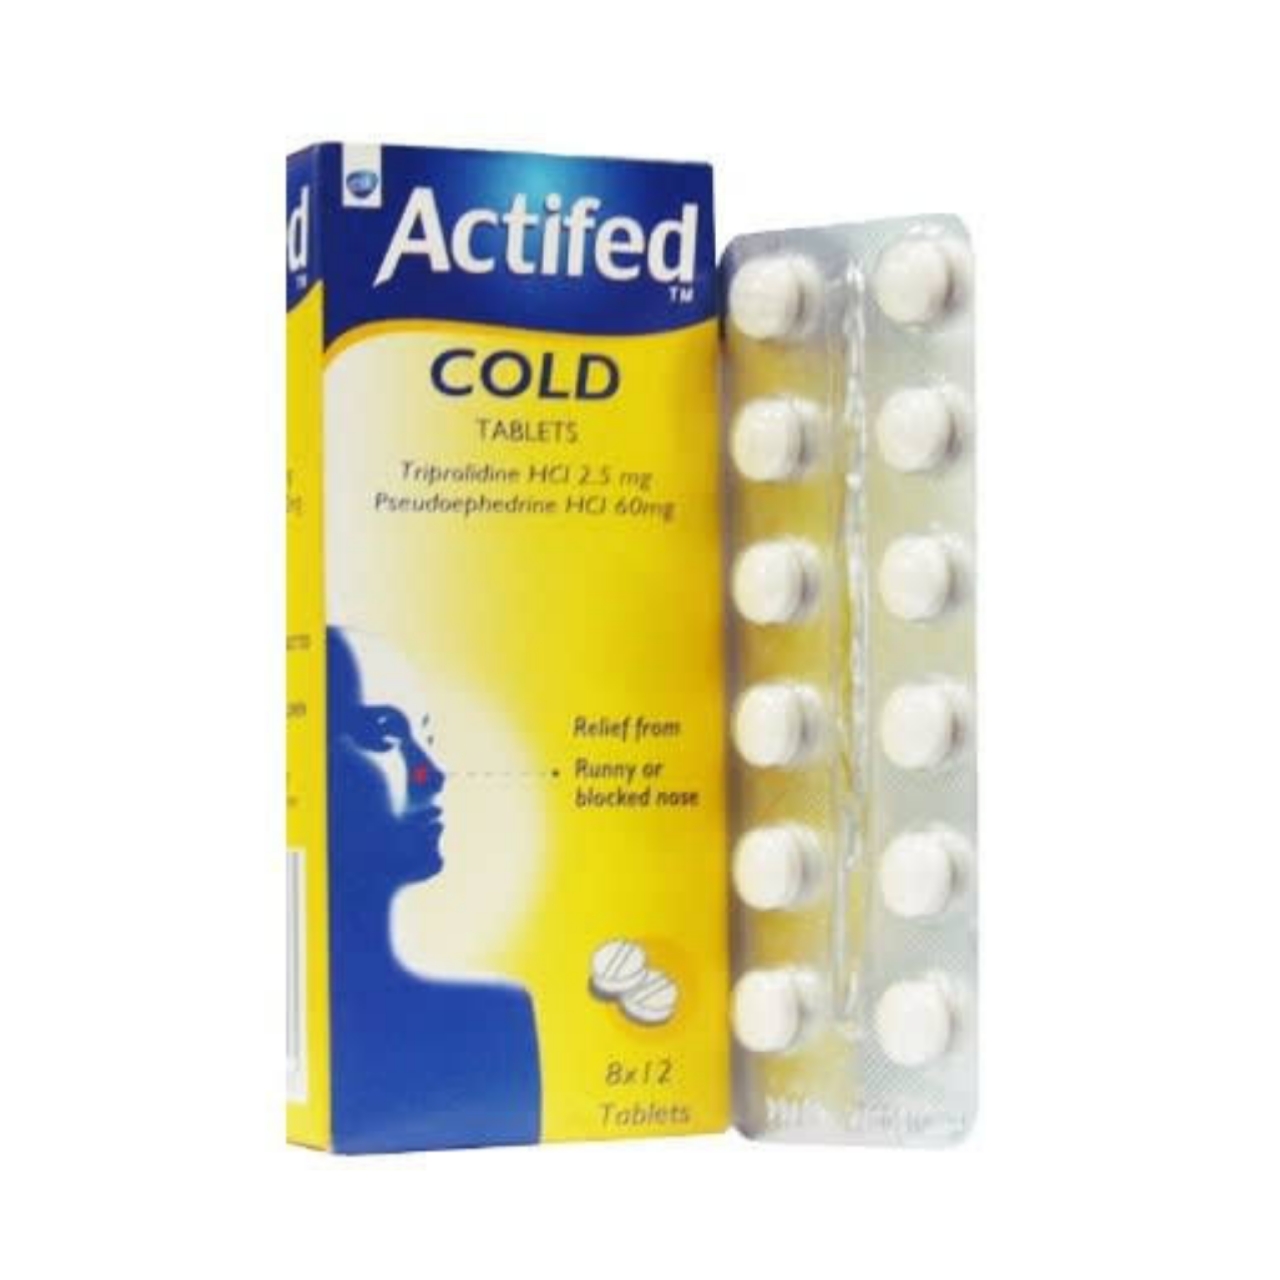 Actified tablets